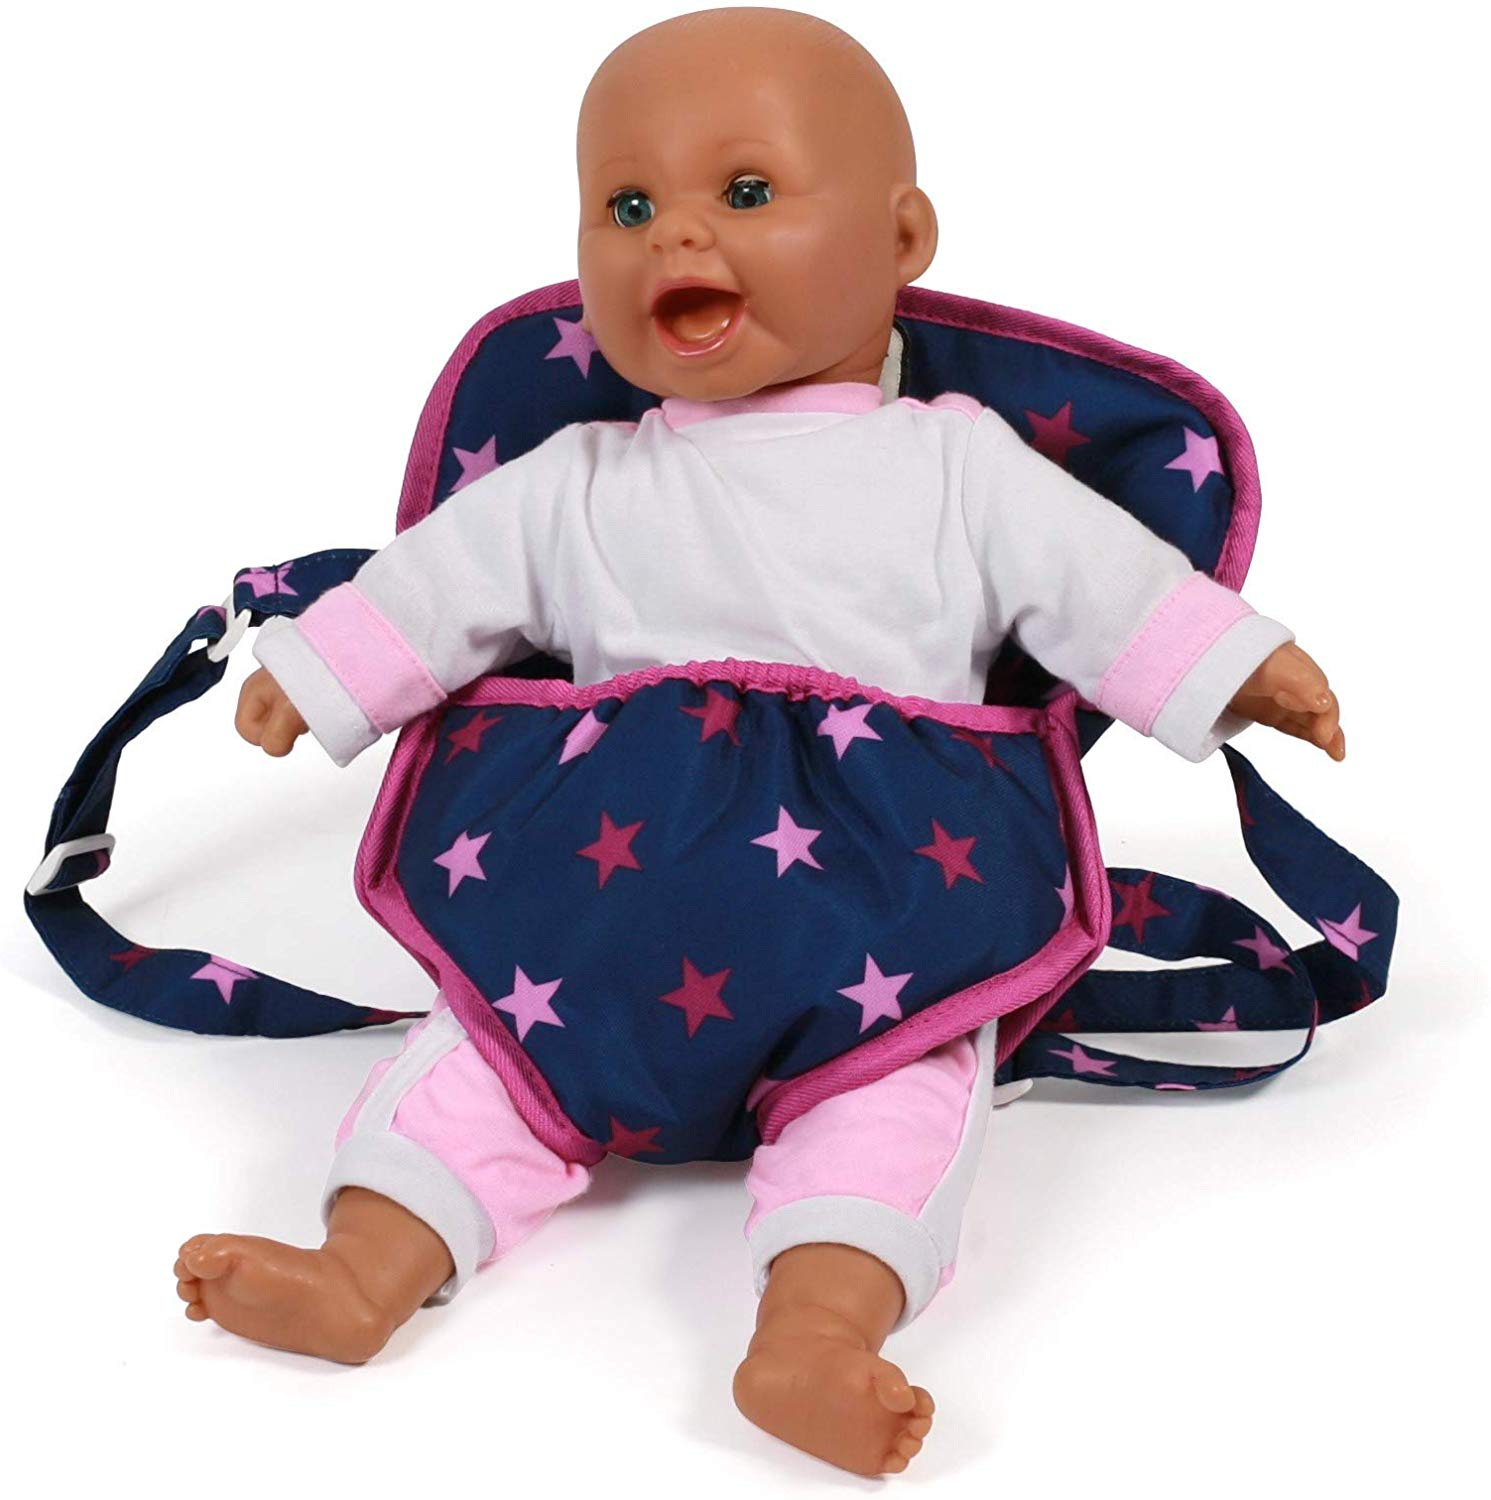 Bayer Chic 2000 782 72 Doll Carrier Strap for Baby Dolls, Doll Accessories, Stars Navy Pink